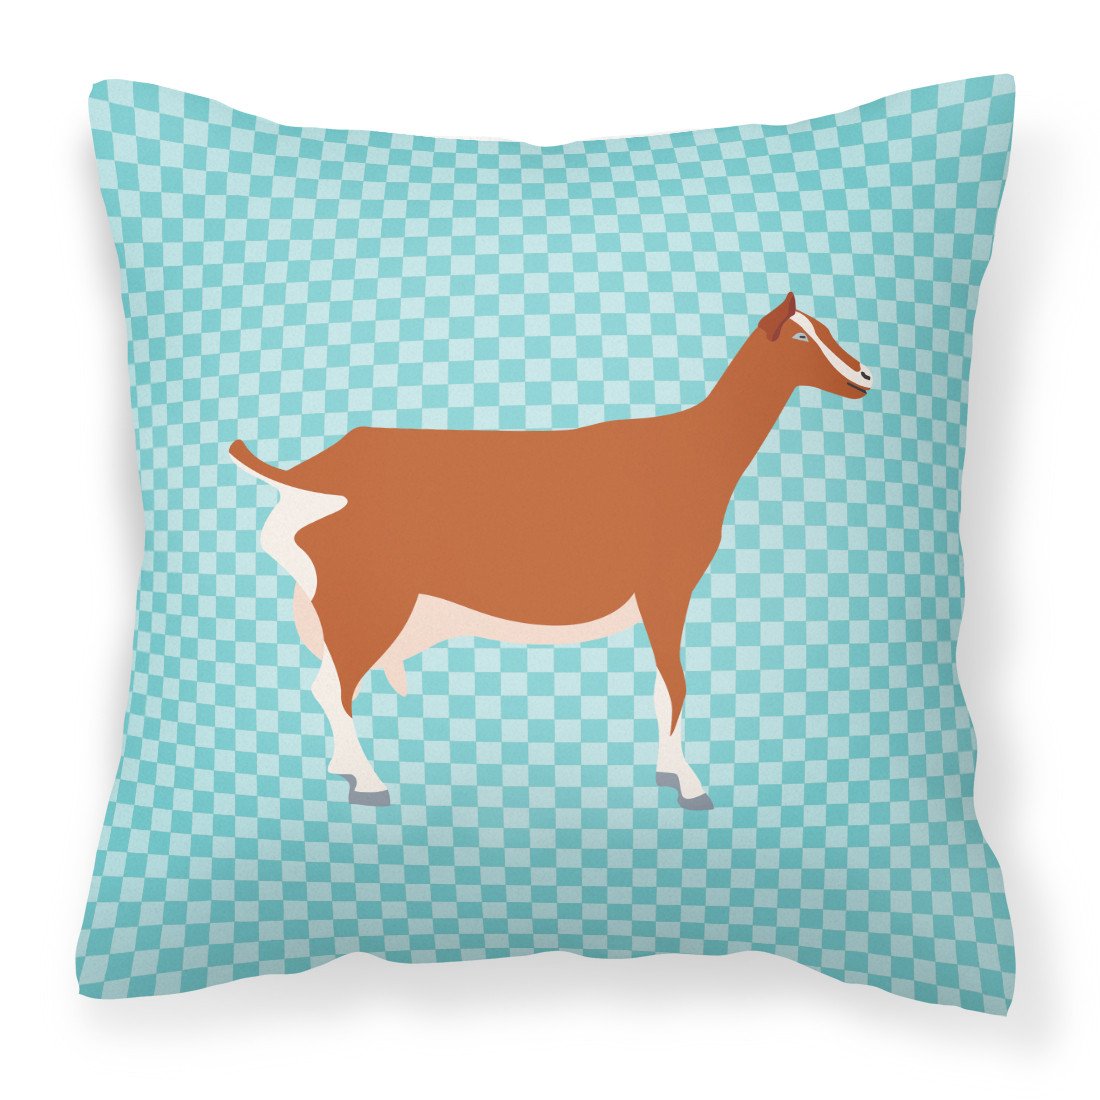 Toggenburger Goat Blue Check Fabric Decorative Pillow BB8055PW1818 by Caroline's Treasures